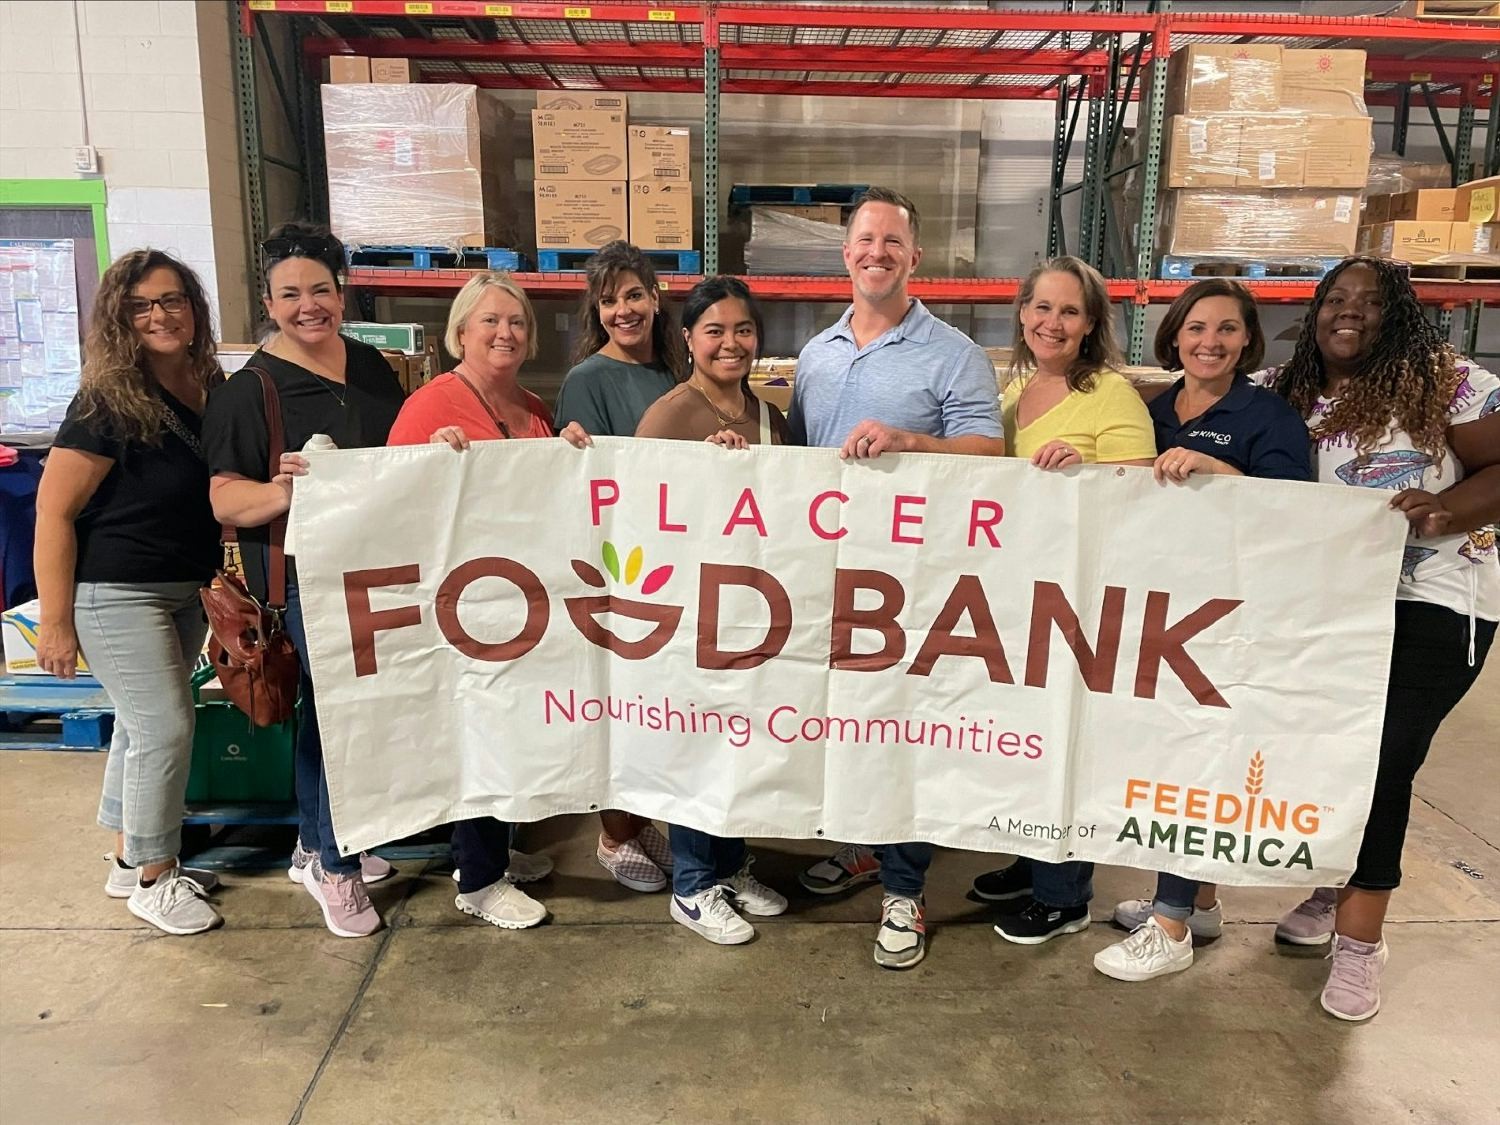 Our team out of Roseville, CA volunteered at Placer Food Bank, packing 2,760 lbs. of food in just two hours. 